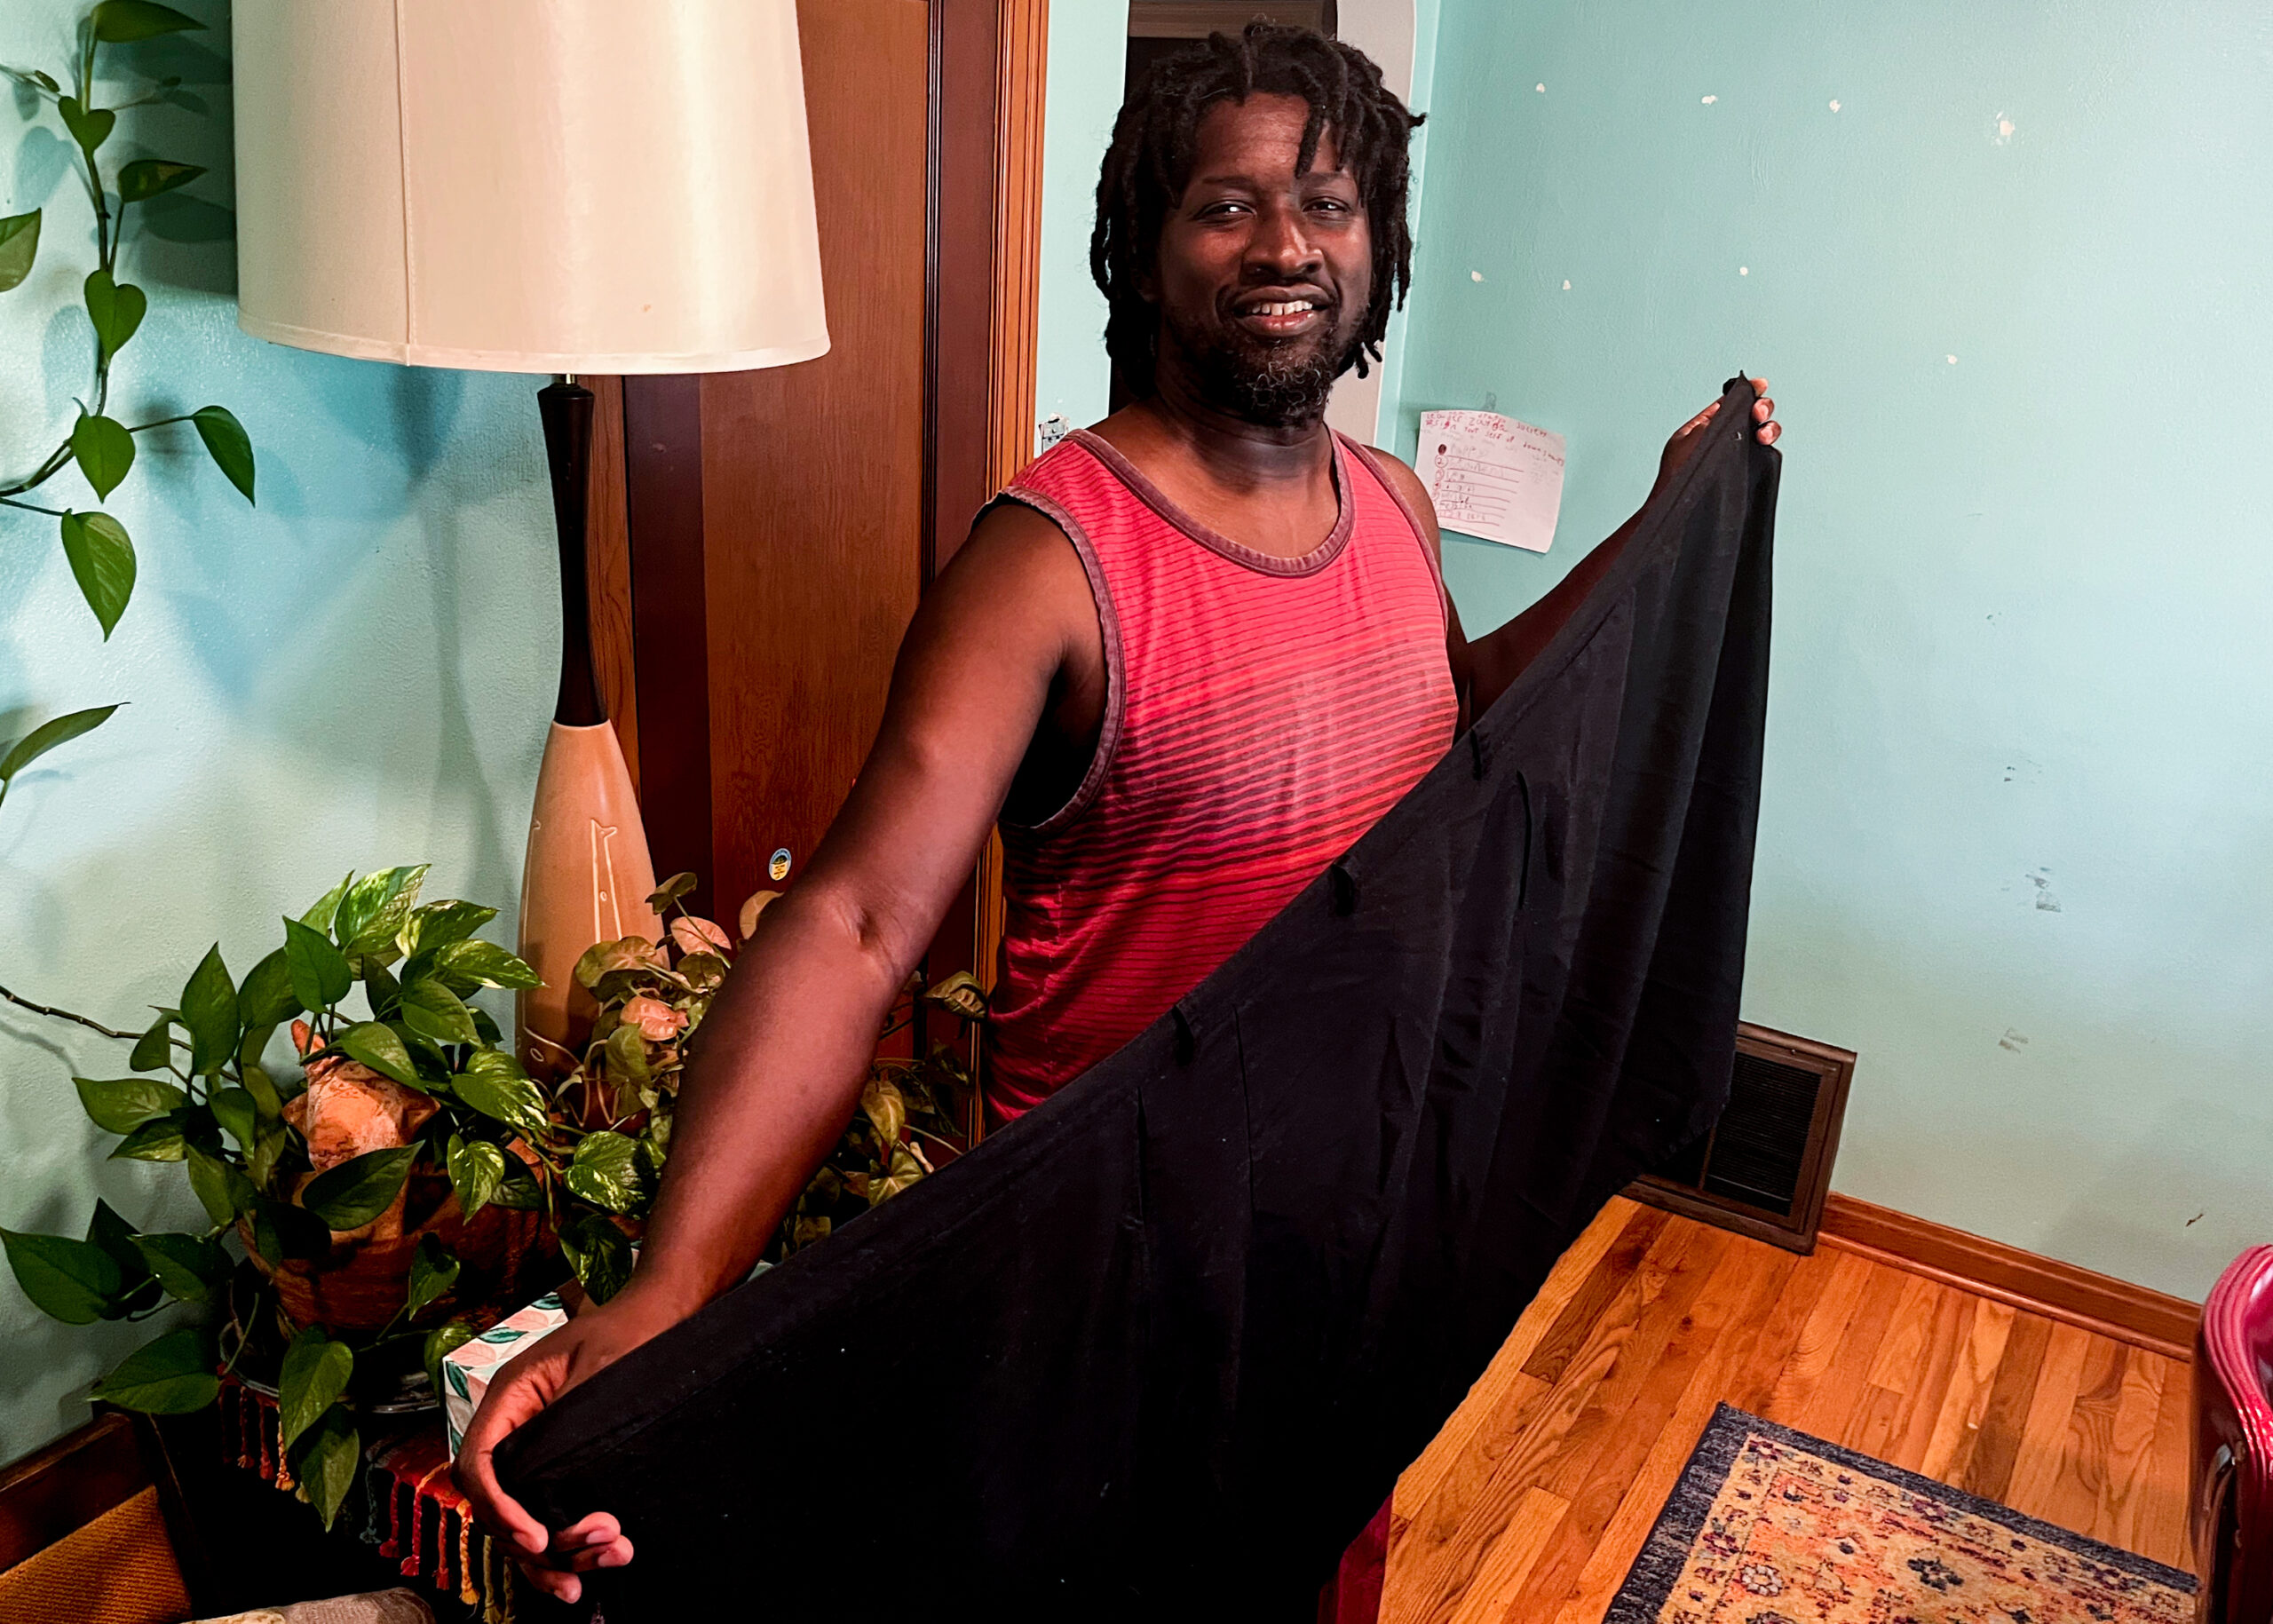 A Black man in a red shirt holds up a black wrap skirt.